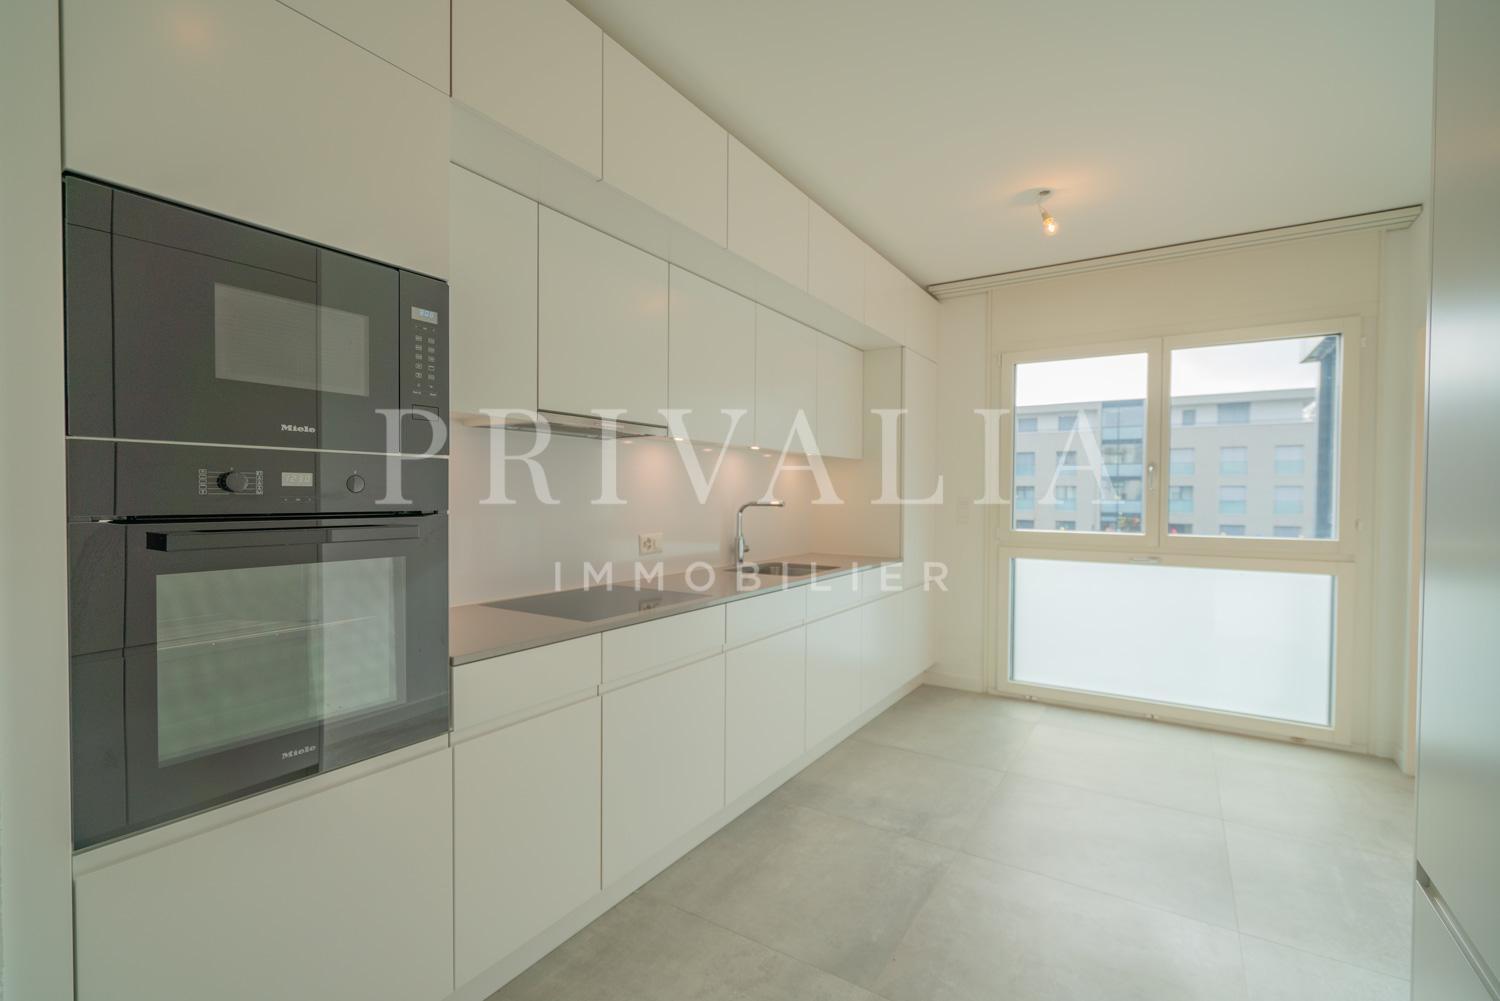 PrivaliaBeautiful 6.5 room apartment on the 2nd floor, in a secure residence